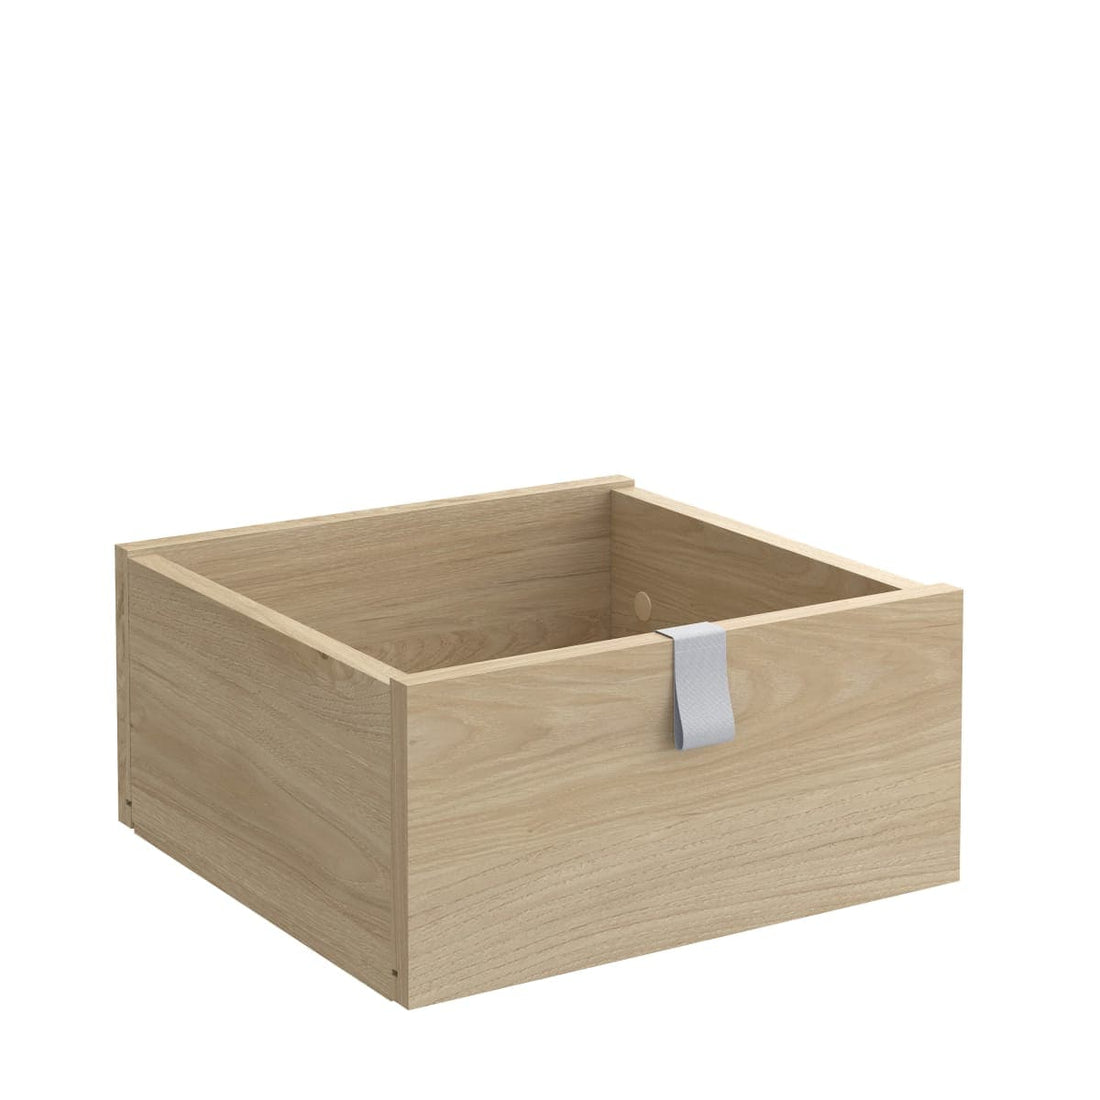 KUB SPACEO DRAWER L32.4xP31.6xH15CM IN WOOD IN OAK COLOUR - best price from Maltashopper.com BR440001993